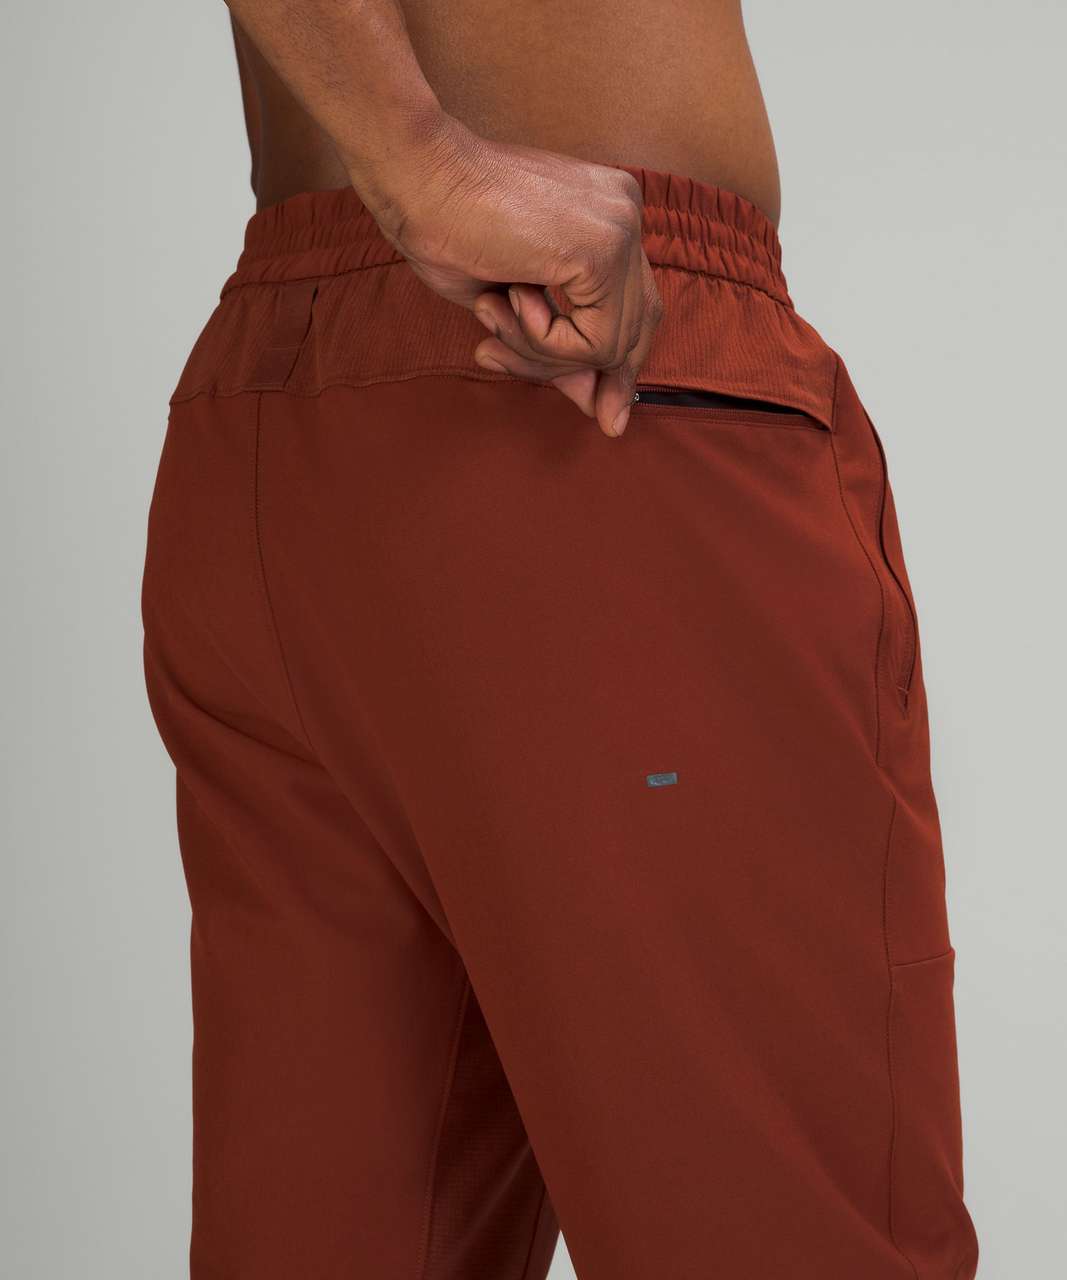 Lululemon License to Train Jogger - Date Brown